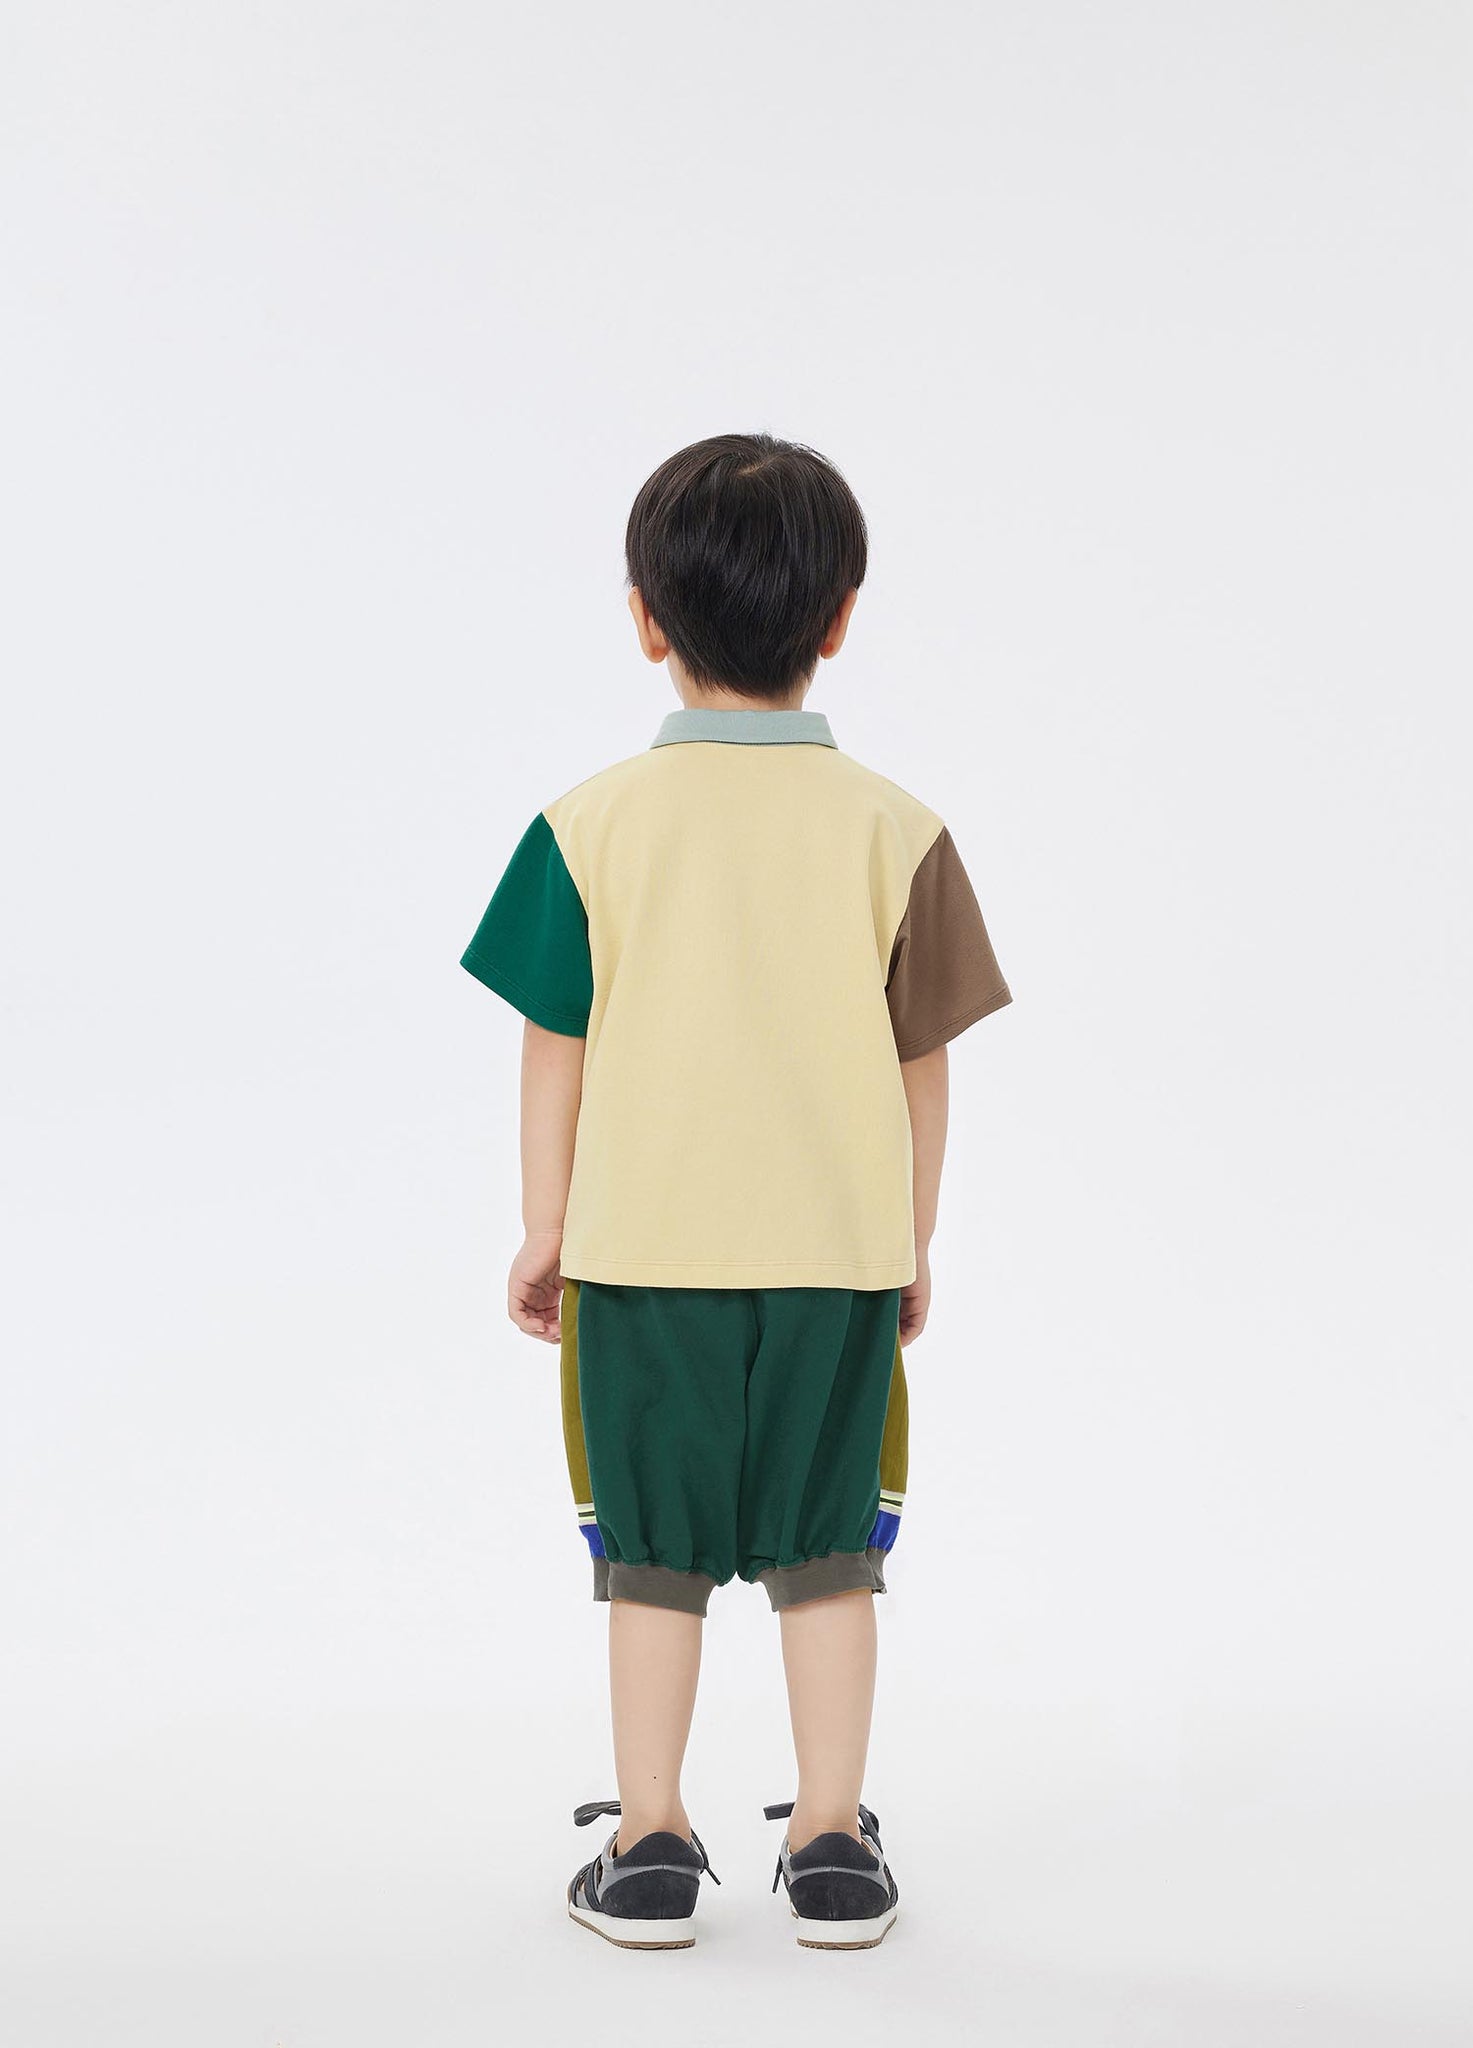 T-Shirt / jnby by JNBY Short Sleeve Polo Shirt